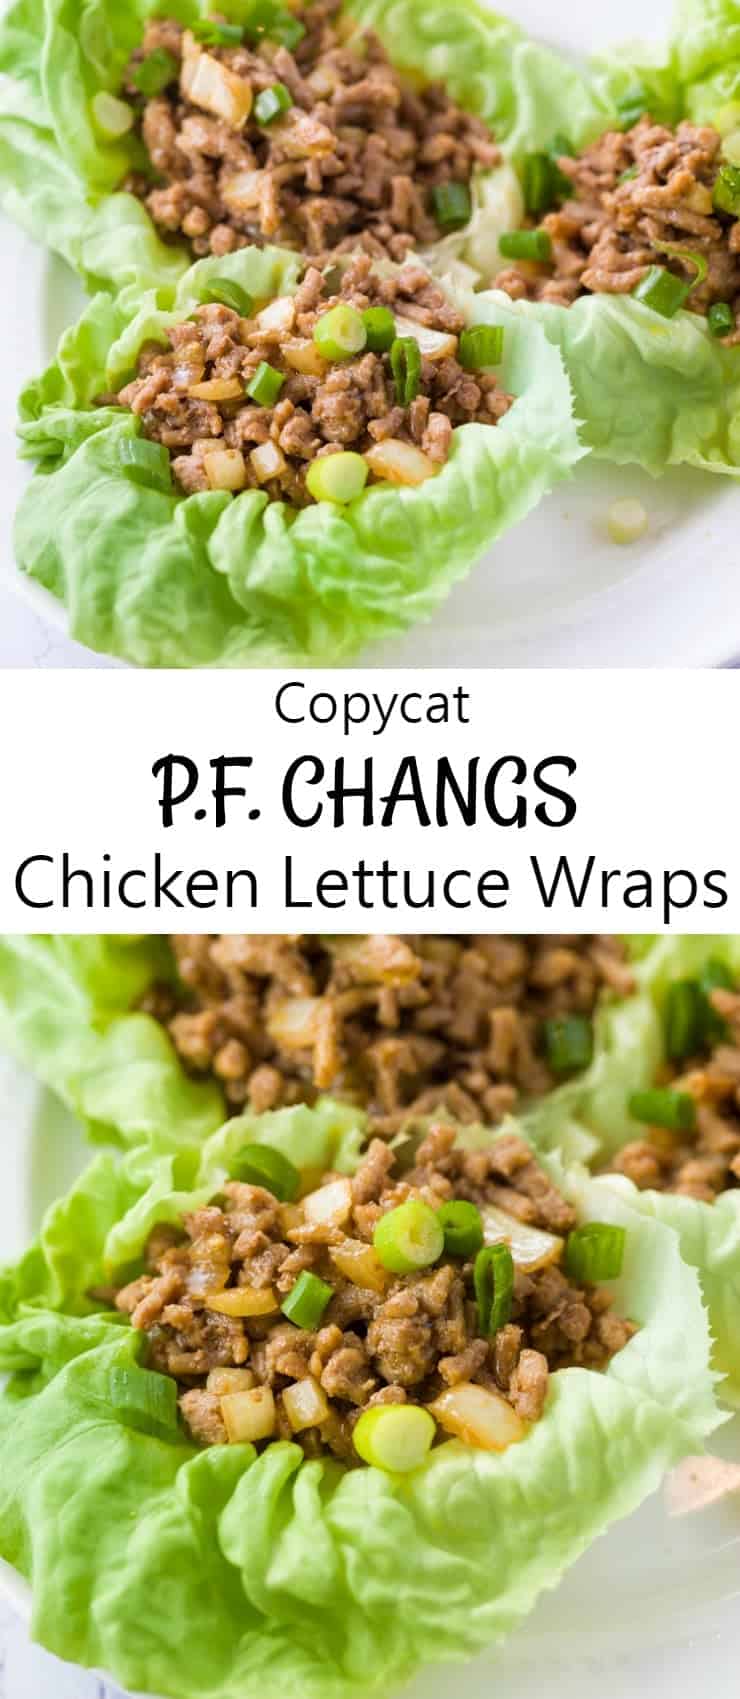 PF Chang's Chicken Lettuce Wraps - The Cozy Cook